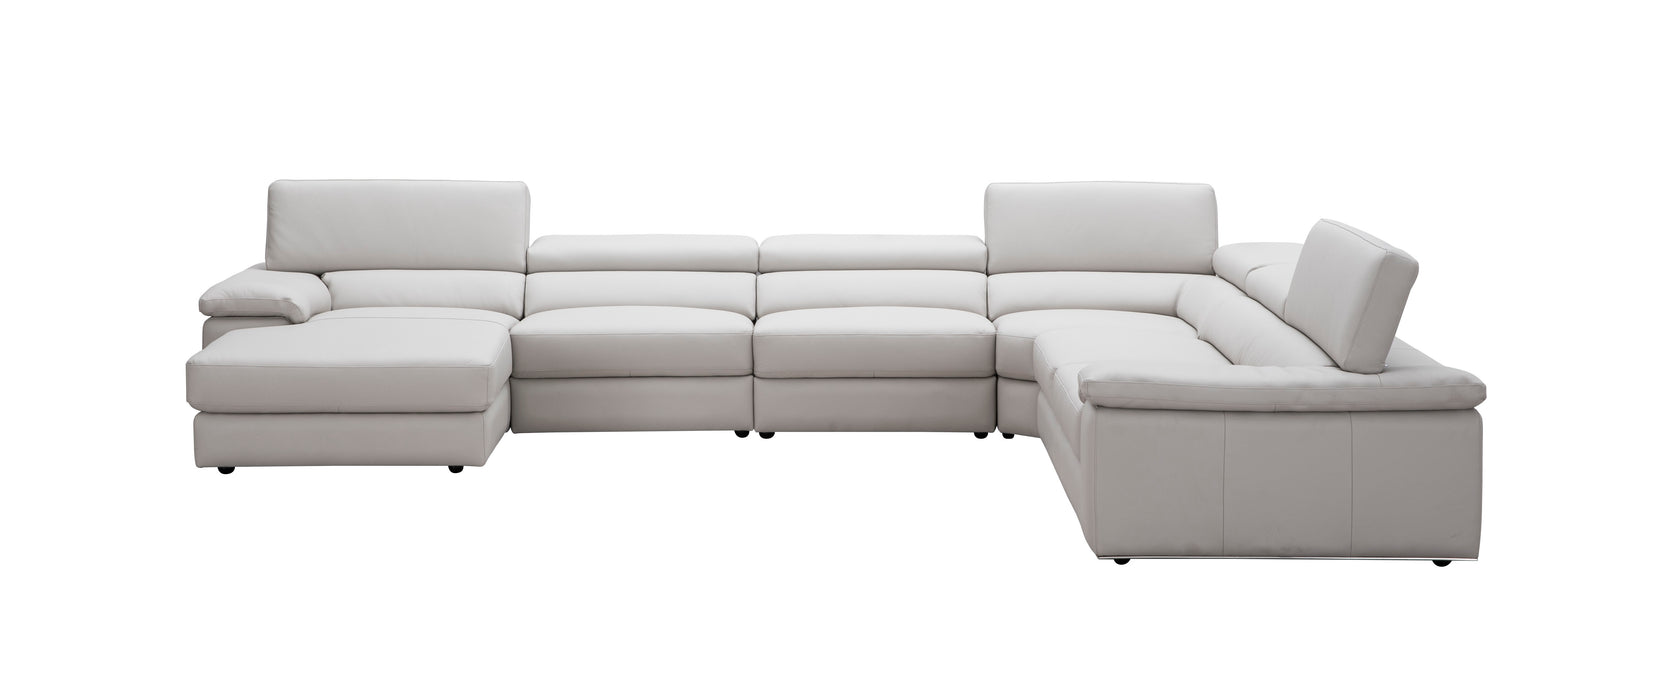 Kobe Left Facing Leather Sectional in Silver Grey